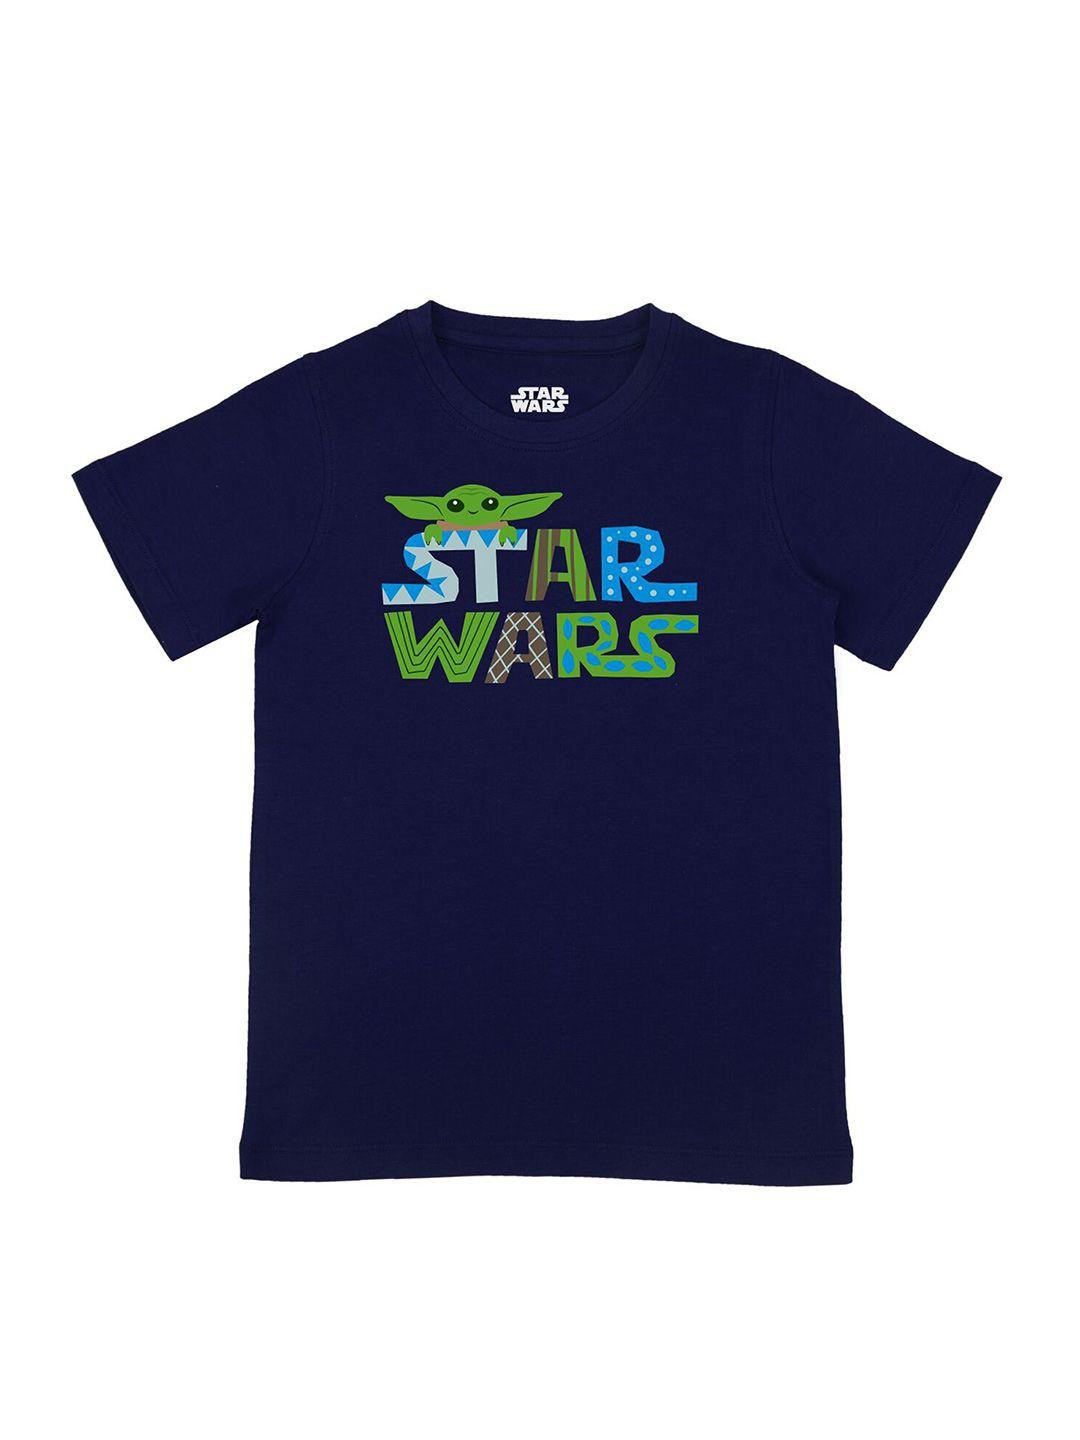 star wars by wear your mind boys navy blue typography star wars printed t-shirt